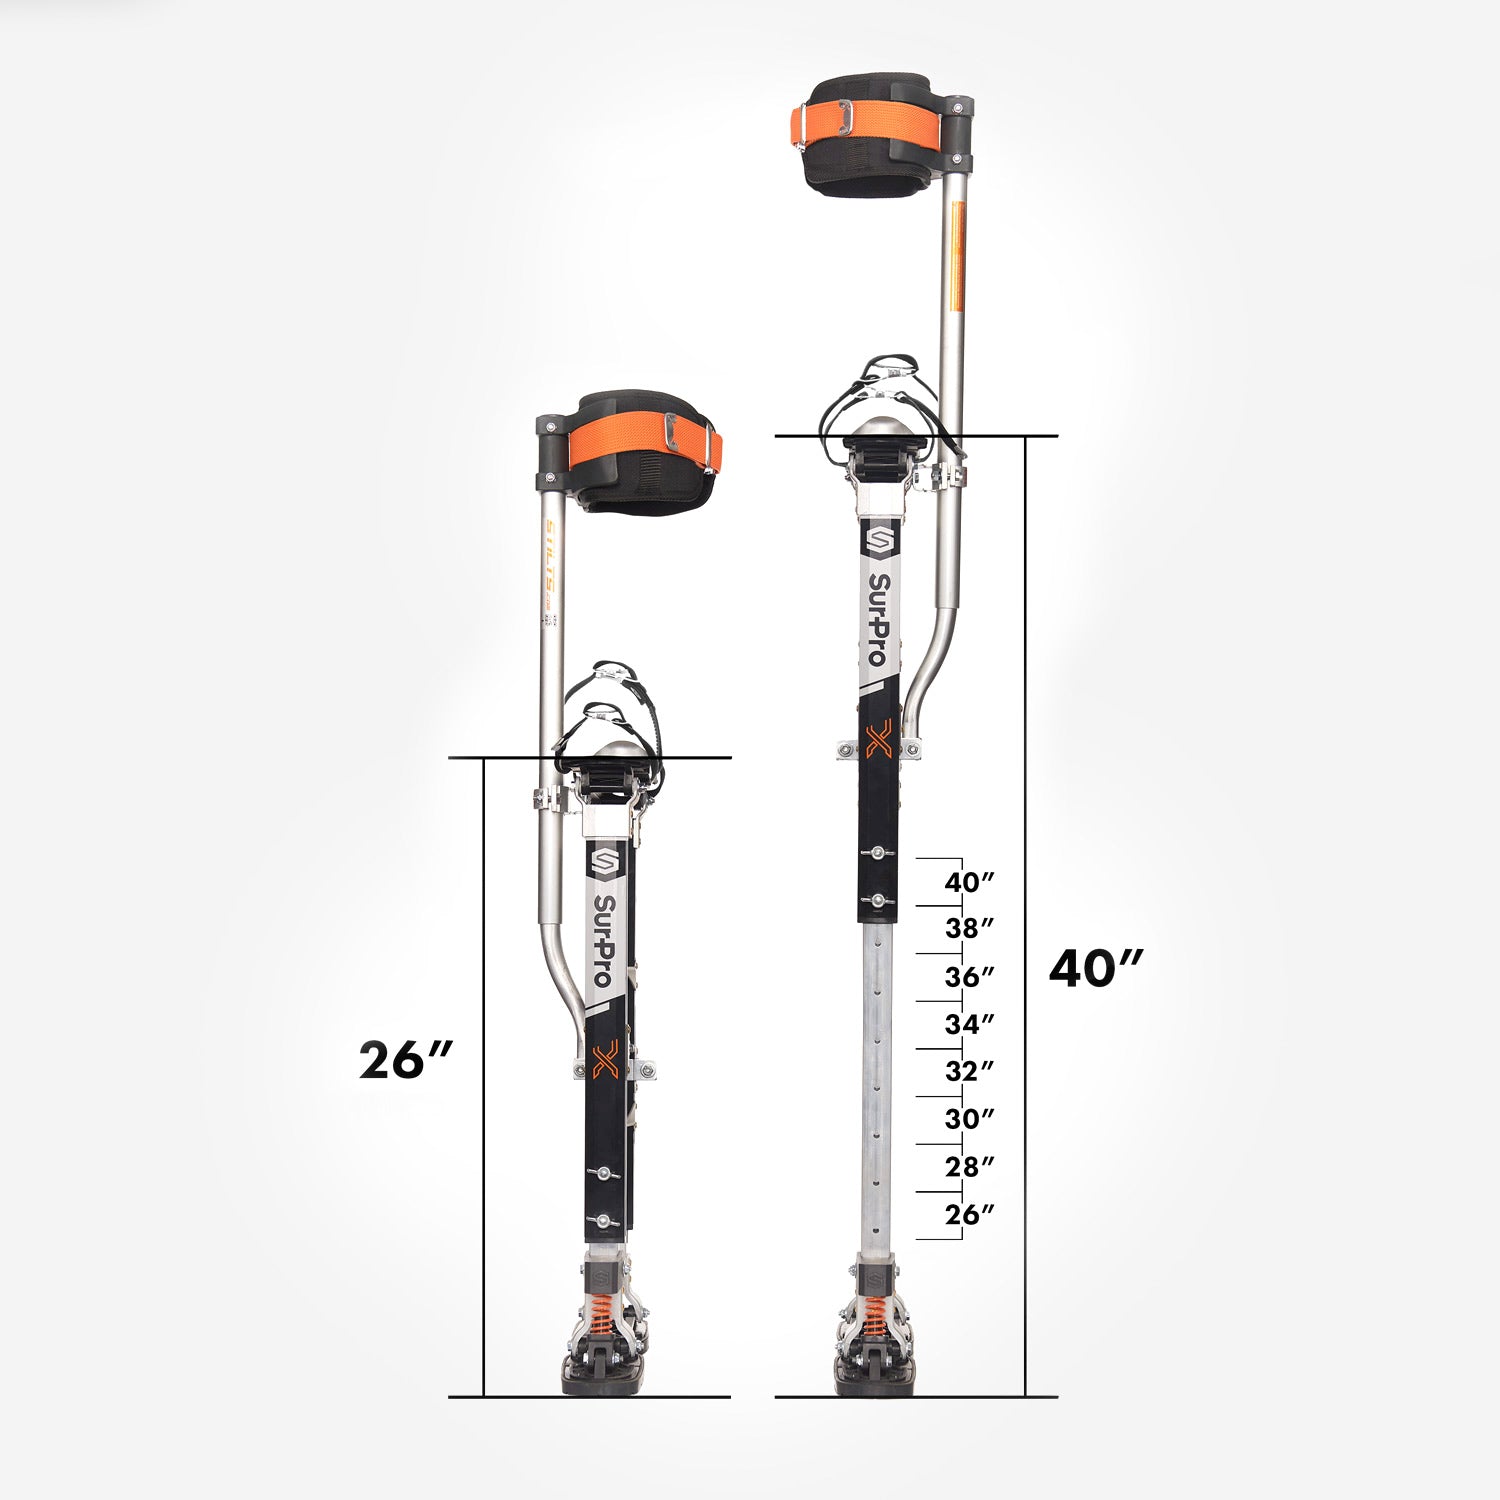 SurPro S1X Stilts 26"-40" shown at minimum and maximum height extensions.